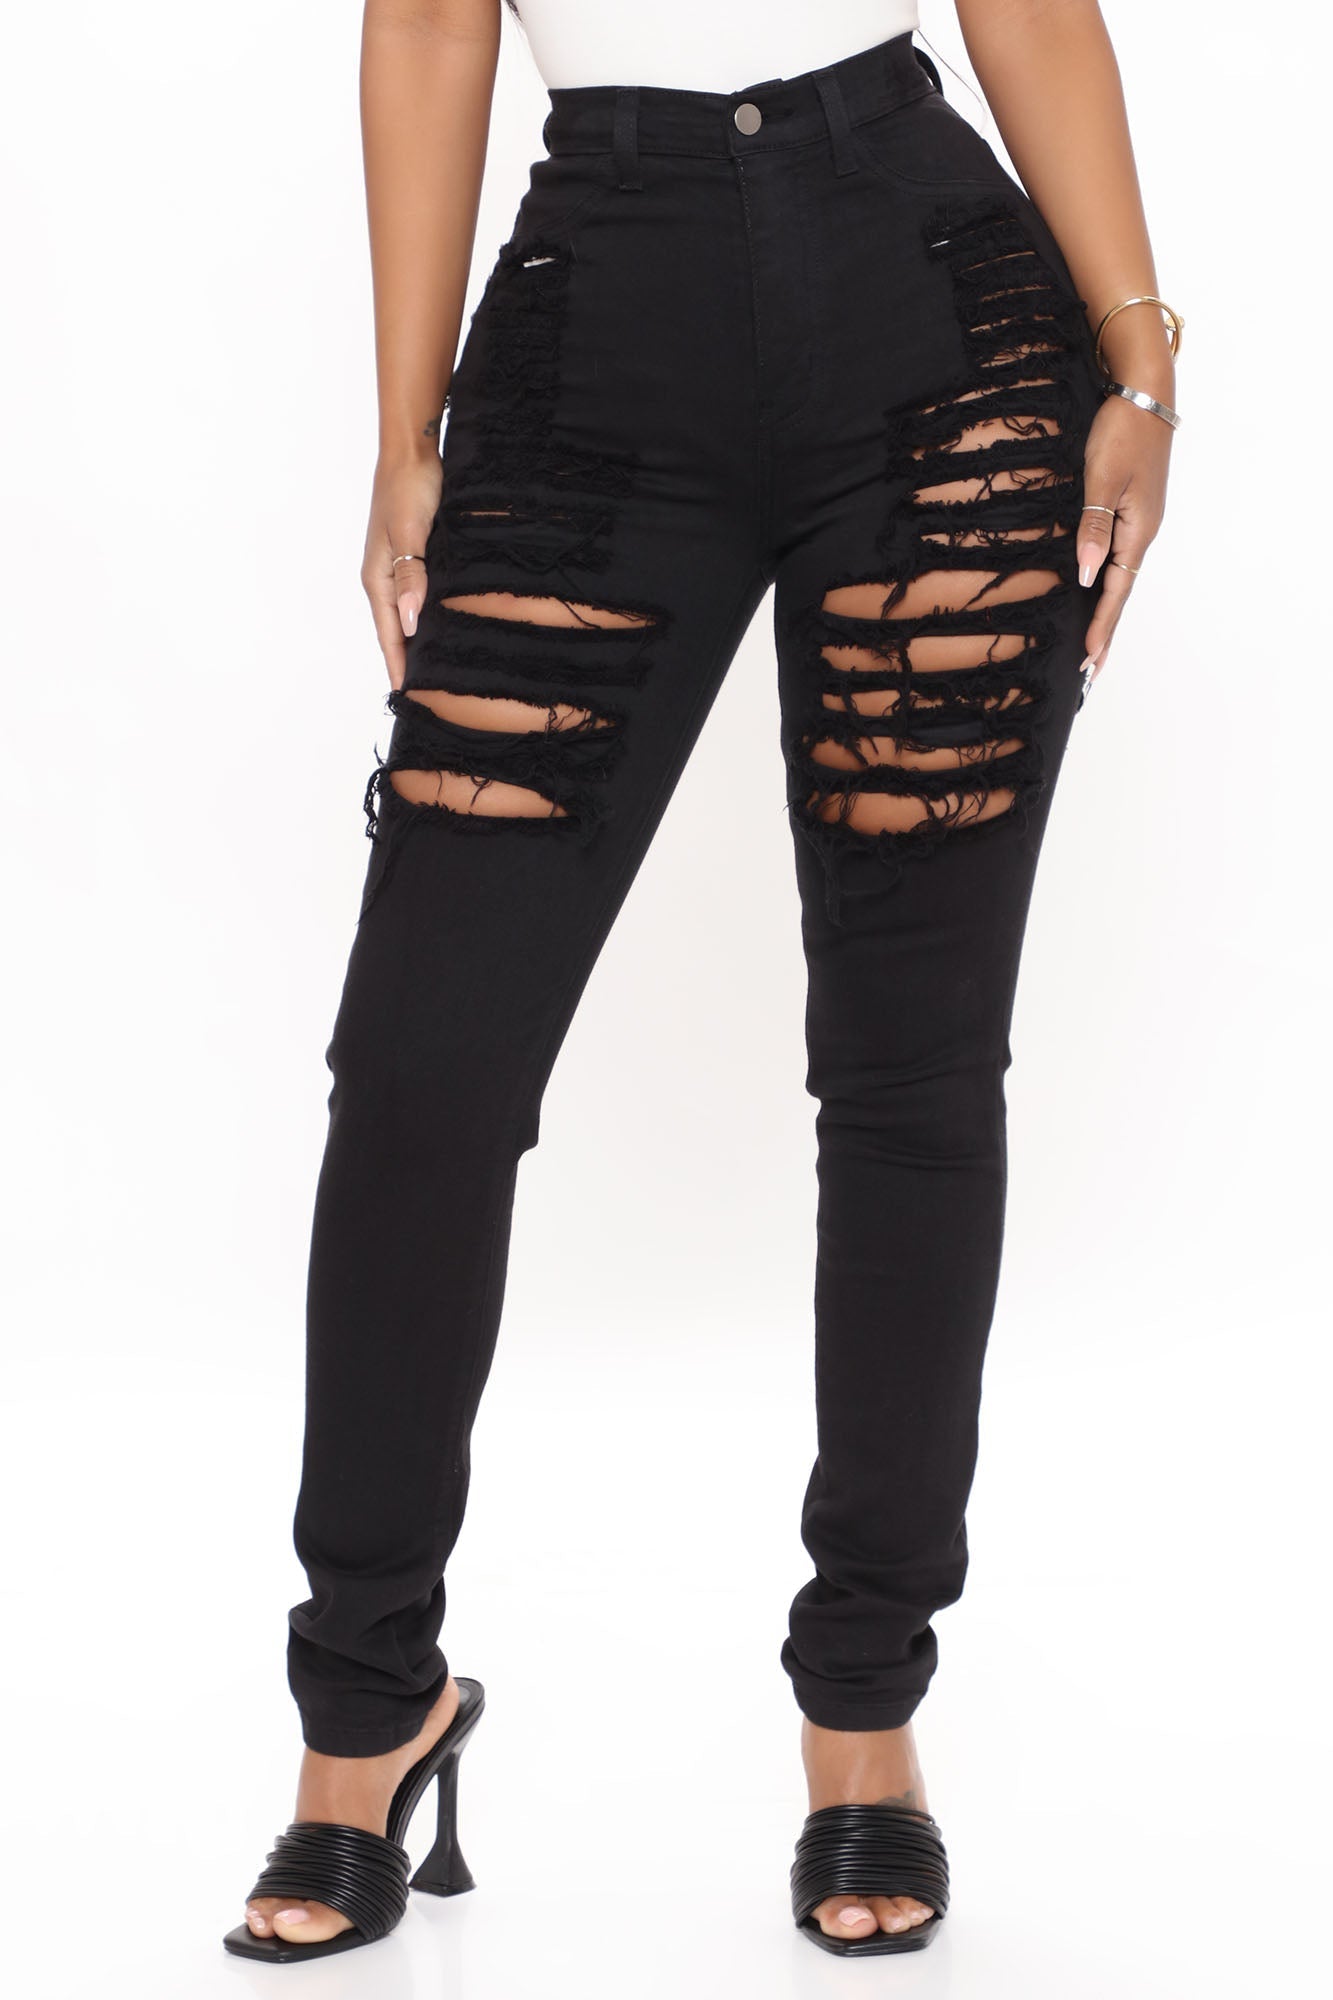 Yes Now Distressed Skinny Jeans - Black